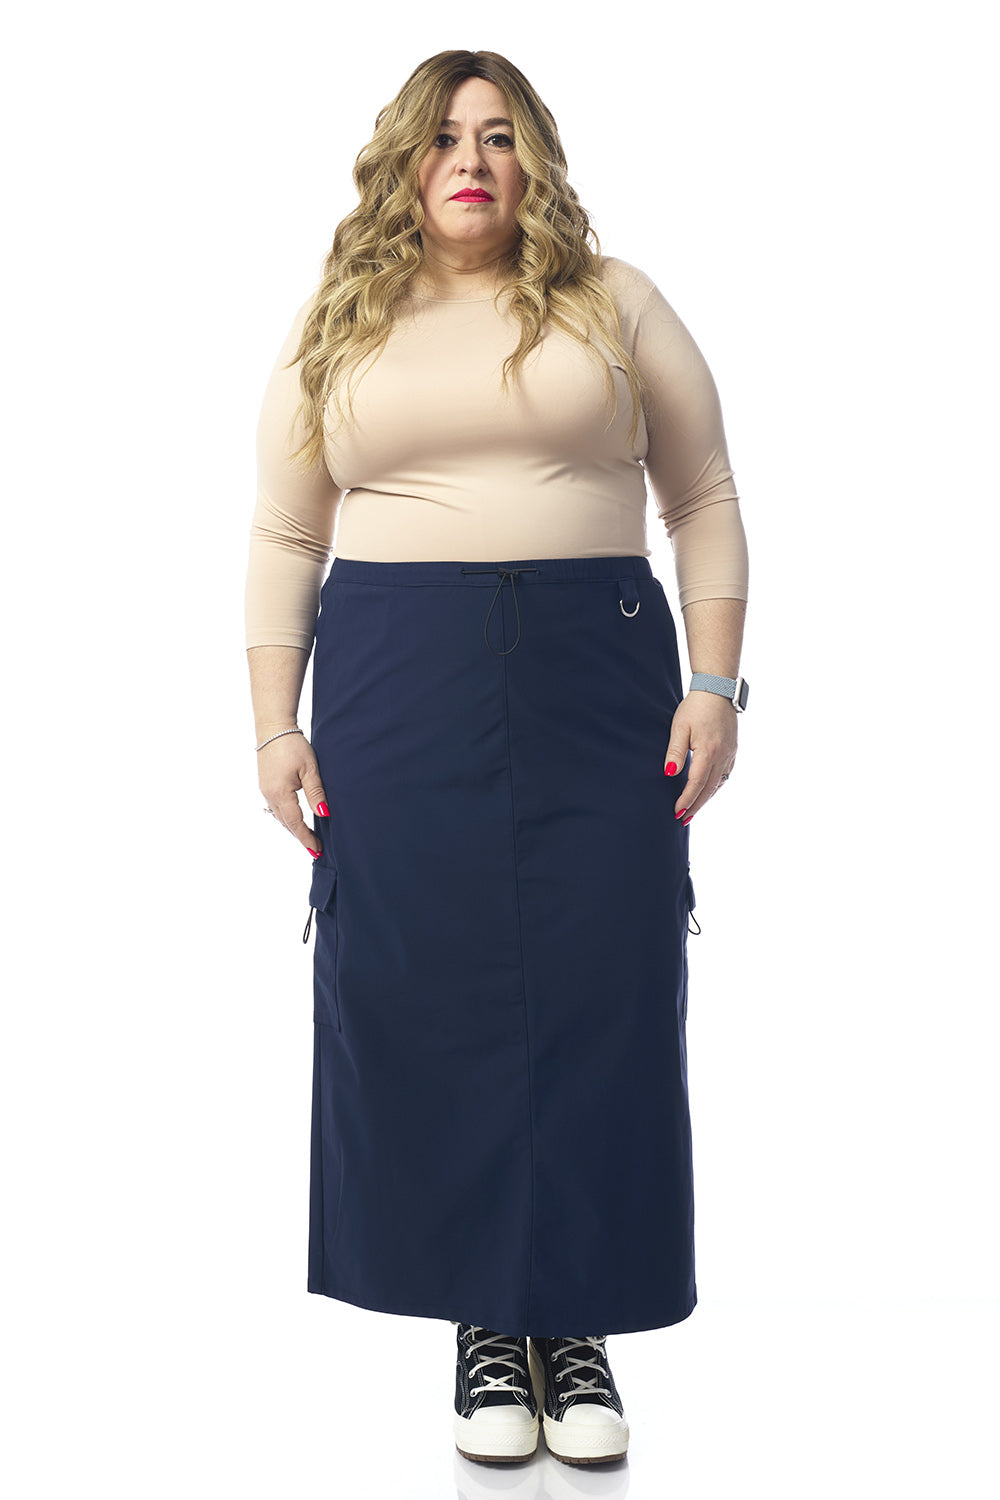 woman wearing navy blue cargo skirt with pockets 